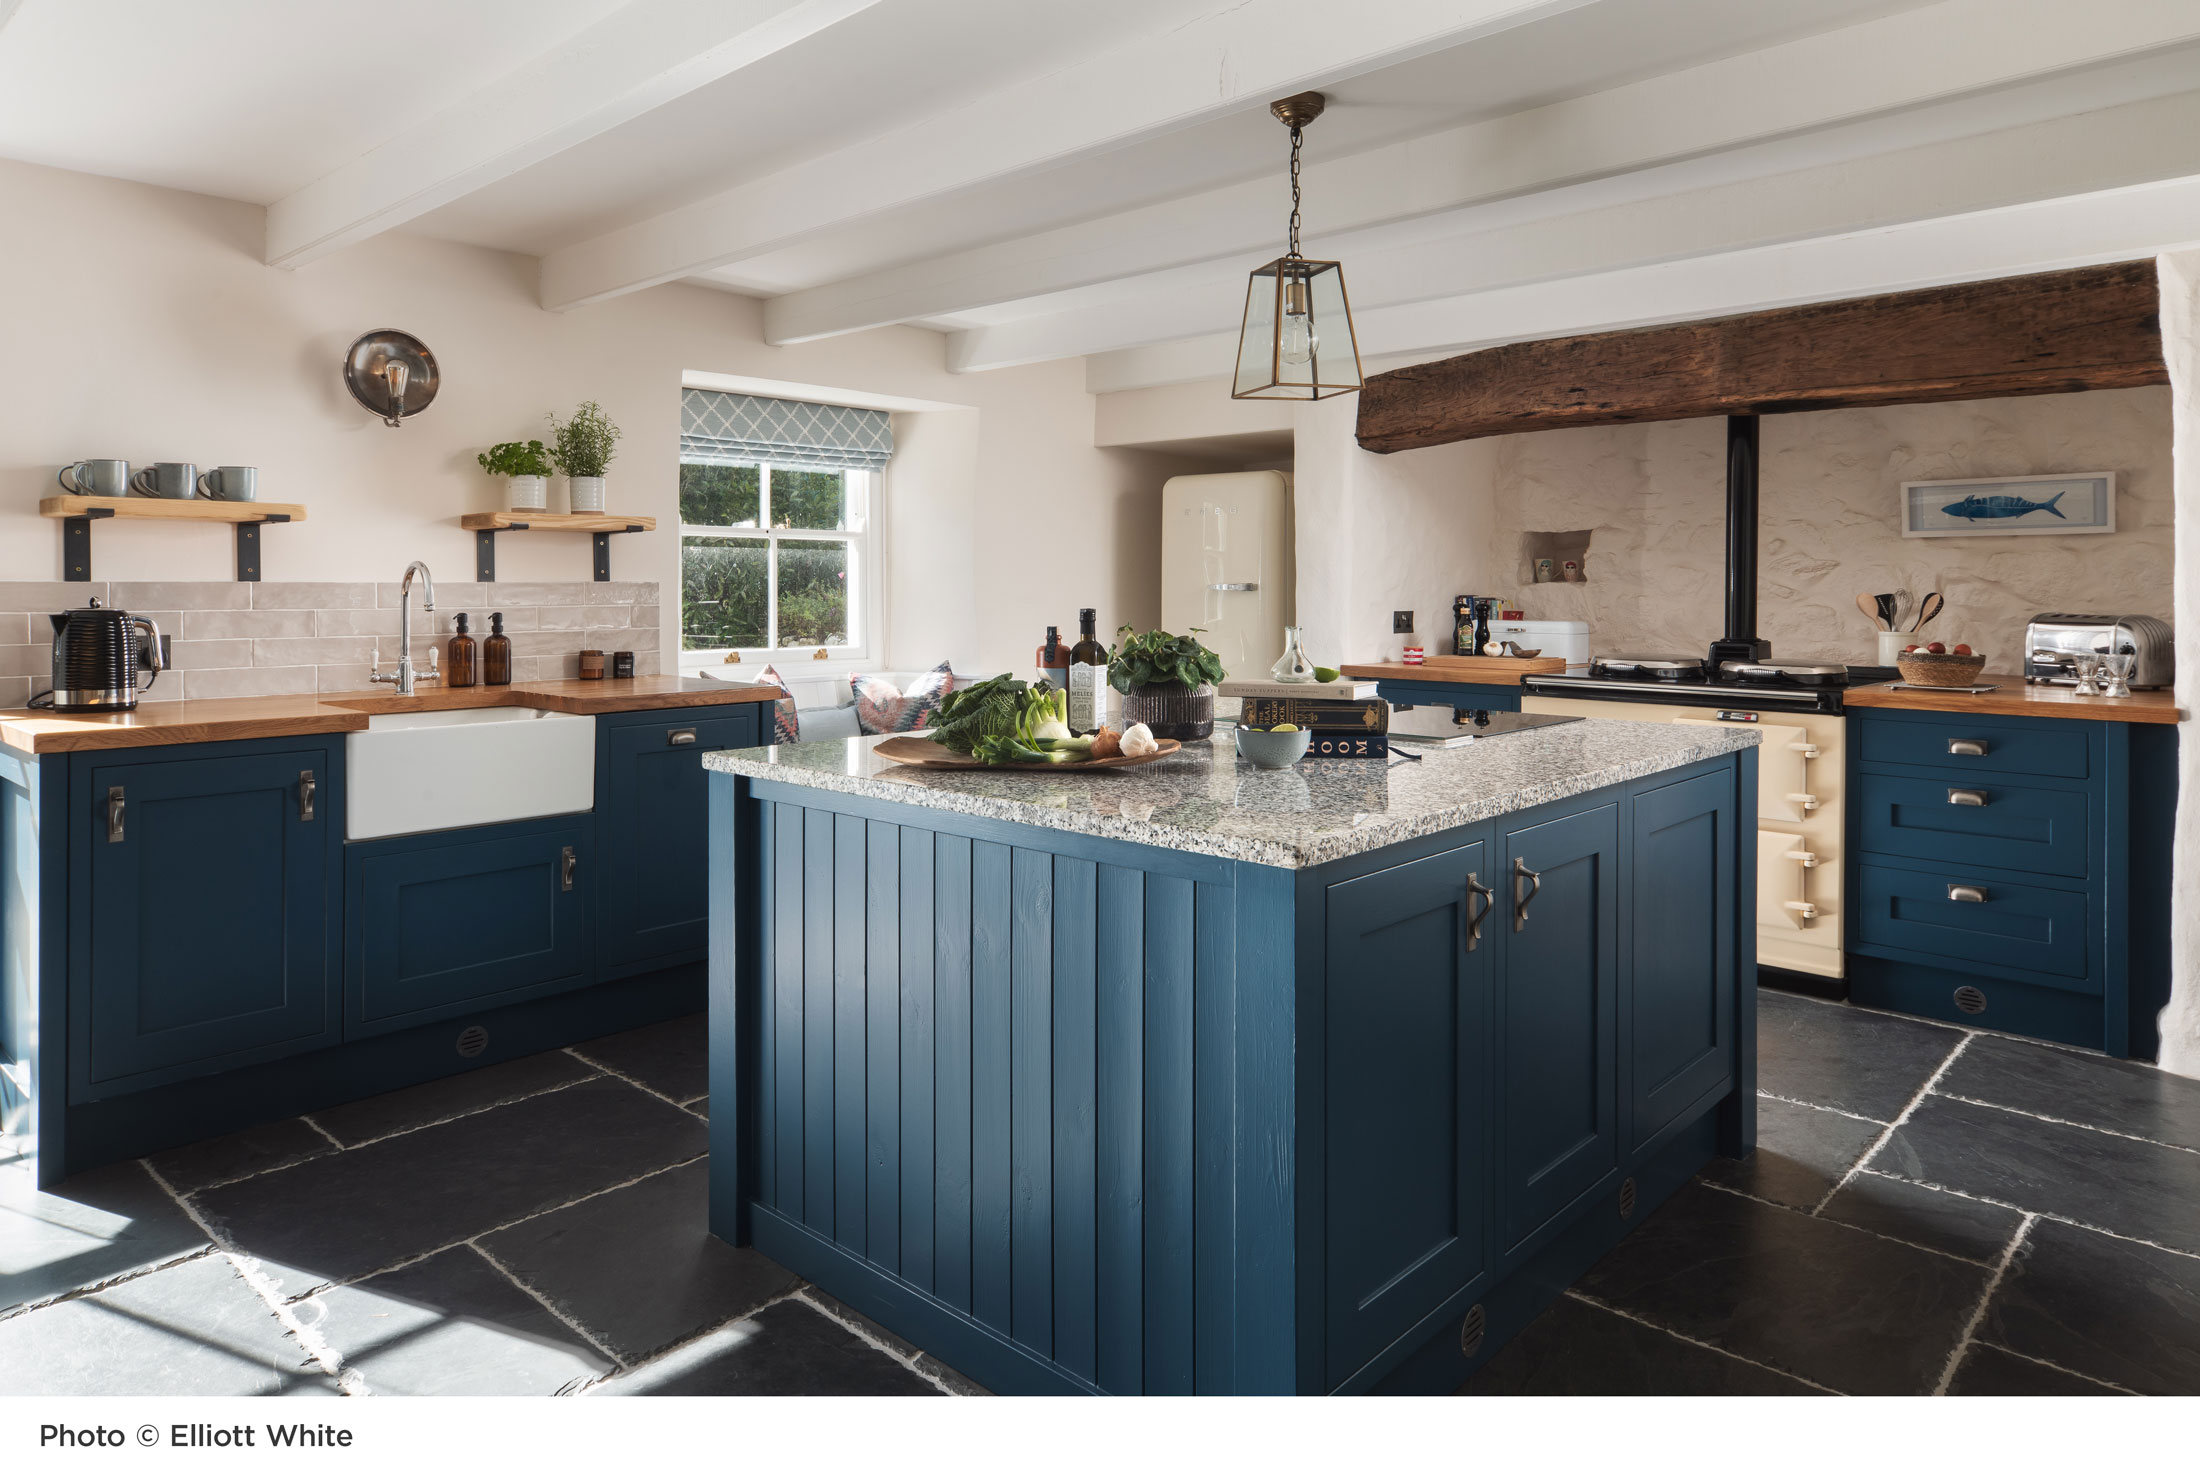 photo of a bespoke kitchen design by Nicola O'Mara with dark blue cabinetry and slate tiled floor